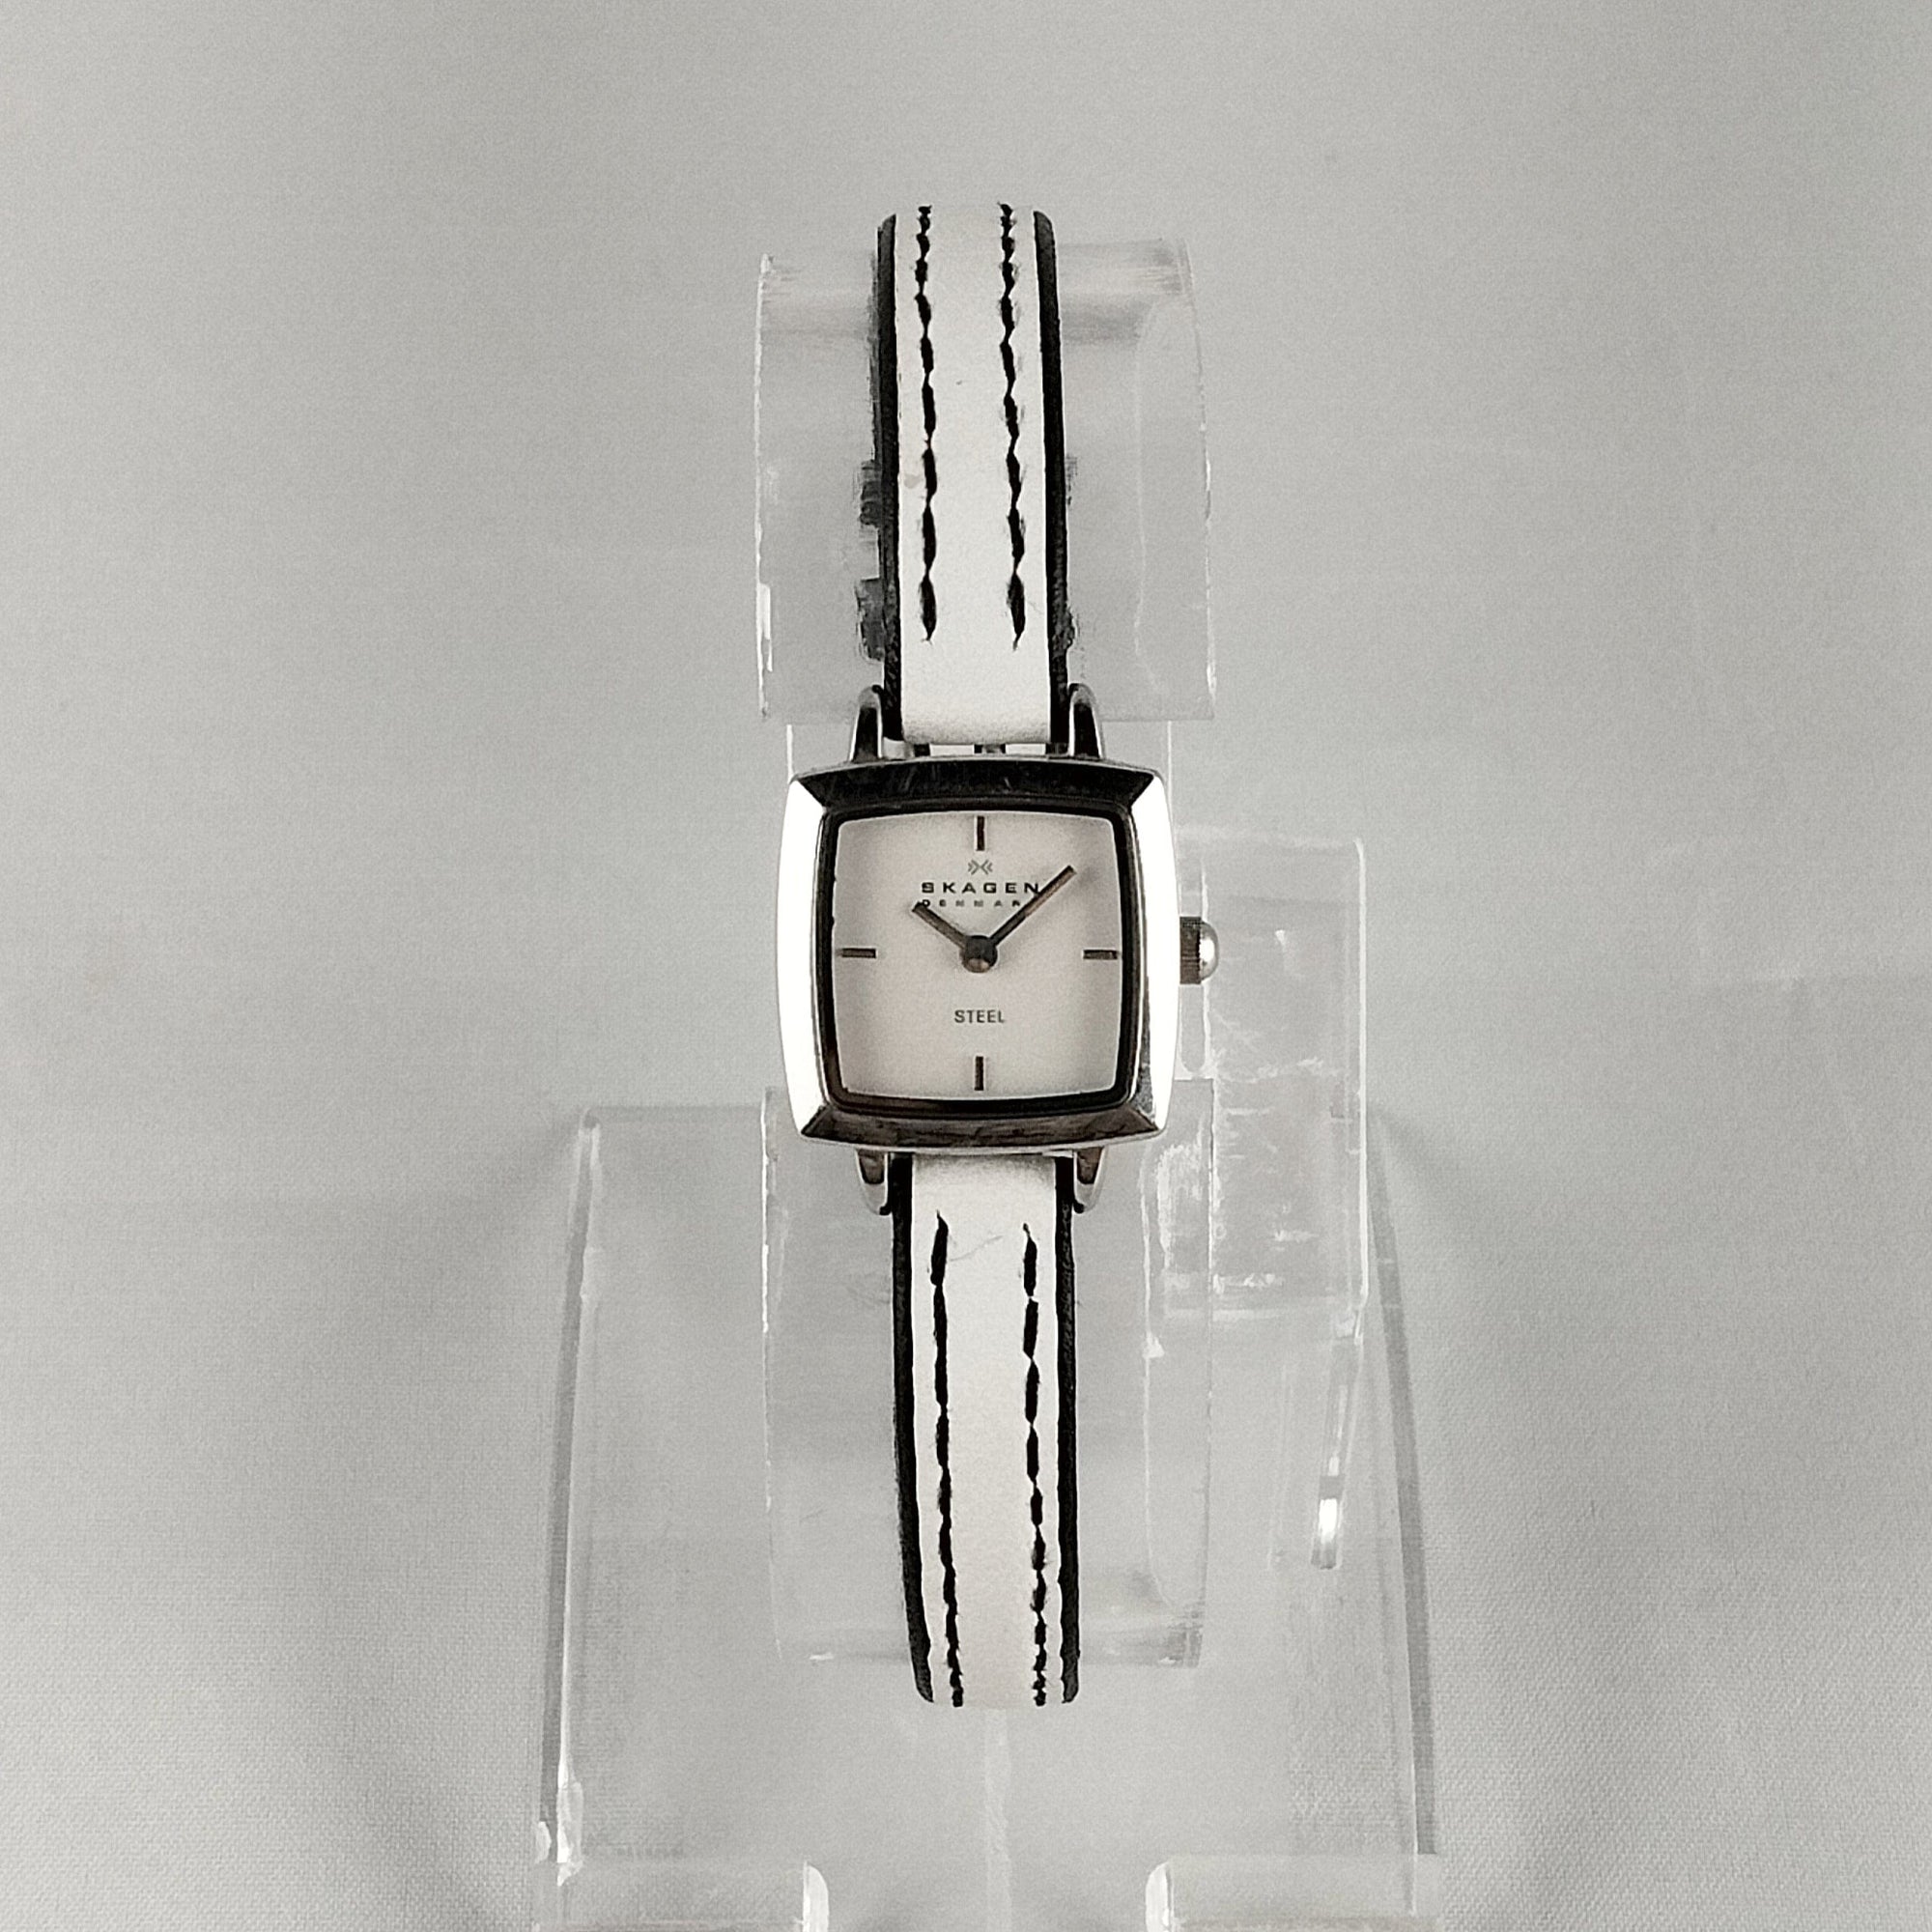 I Like Mikes Mid Century Modern Watches Skagen Women's Stainless Steel Watch, Tiny Square Face, Thin White Genuine Leather Strap